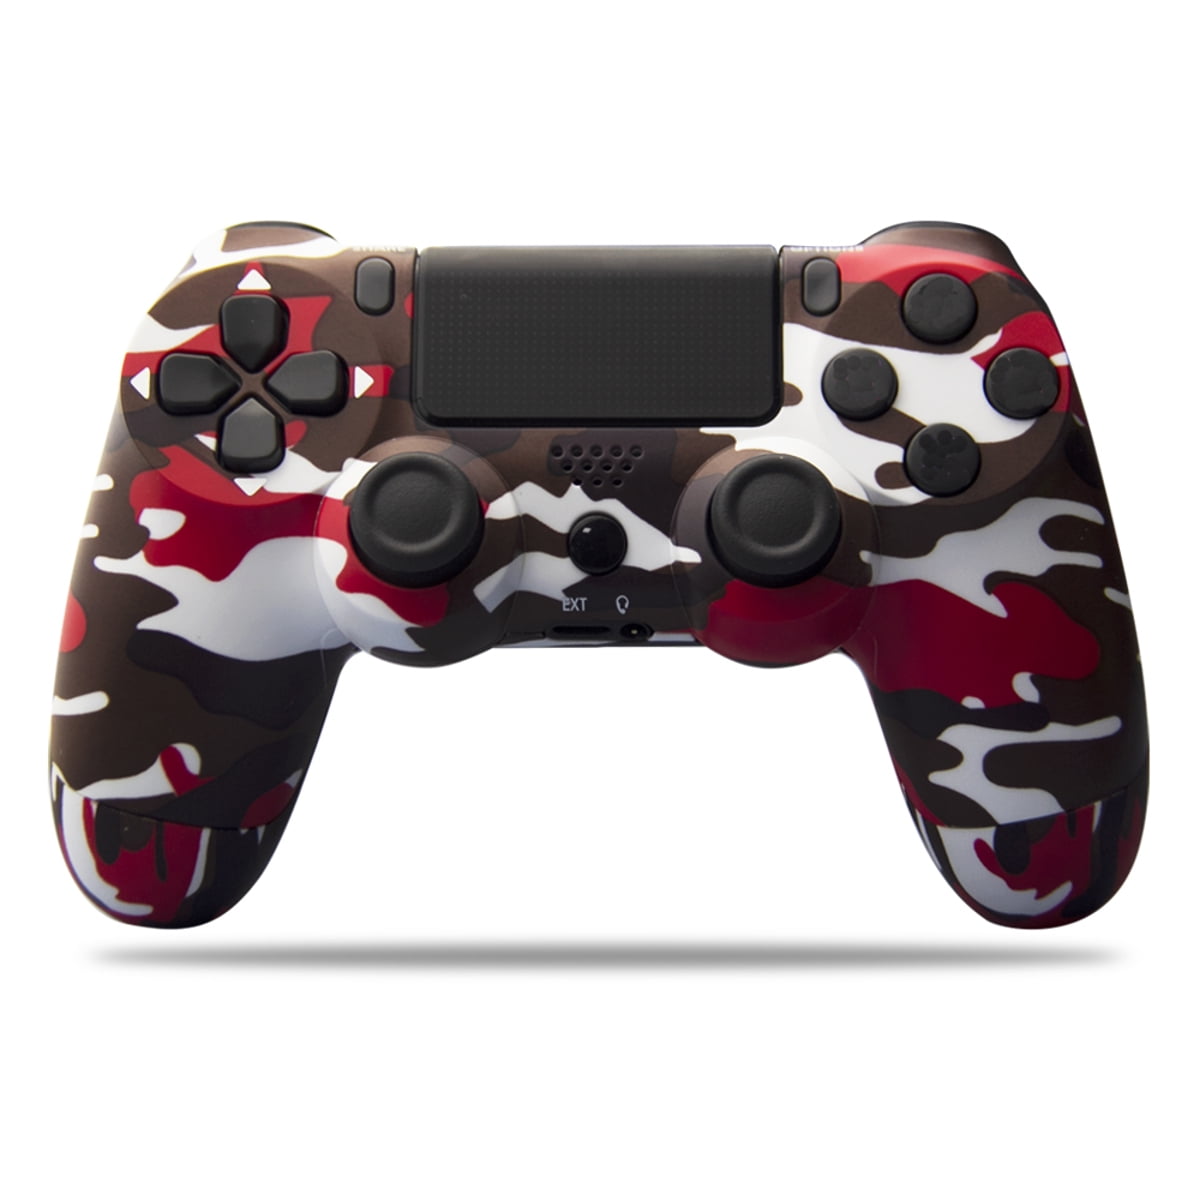 Ps4 Controller Compatible With Playstation Console - Camo Red Walmart.com